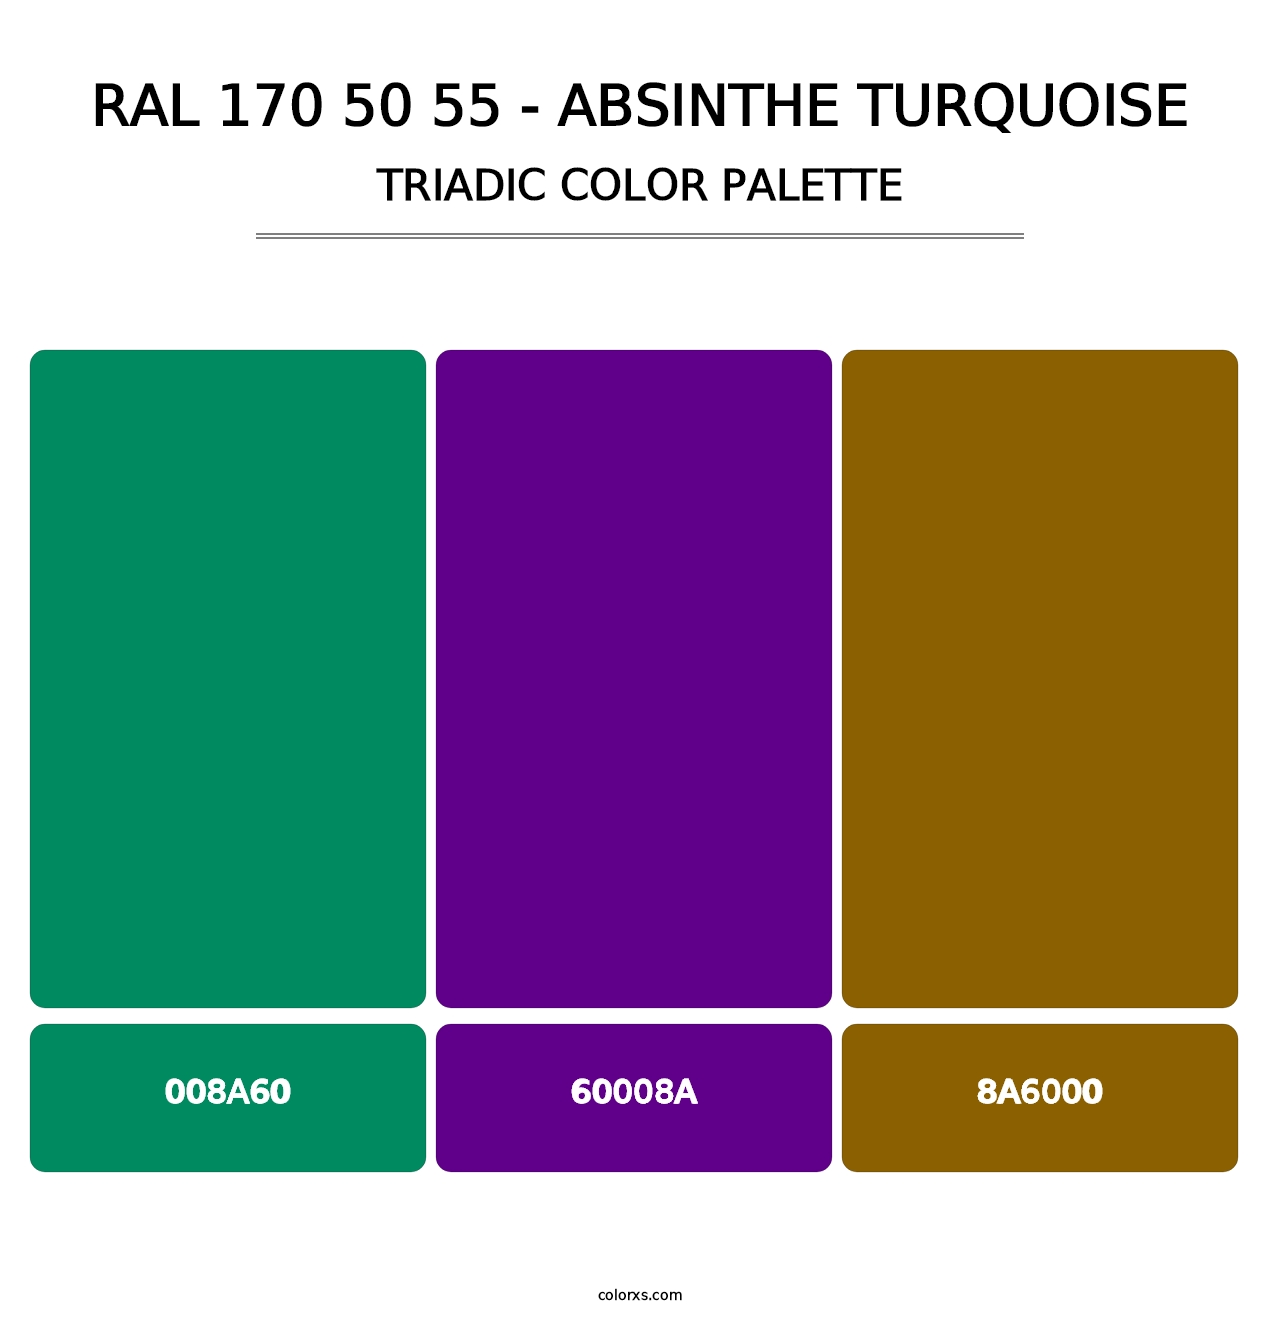 RAL 170 50 55 - Absinthe Turquoise - Triadic Color Palette